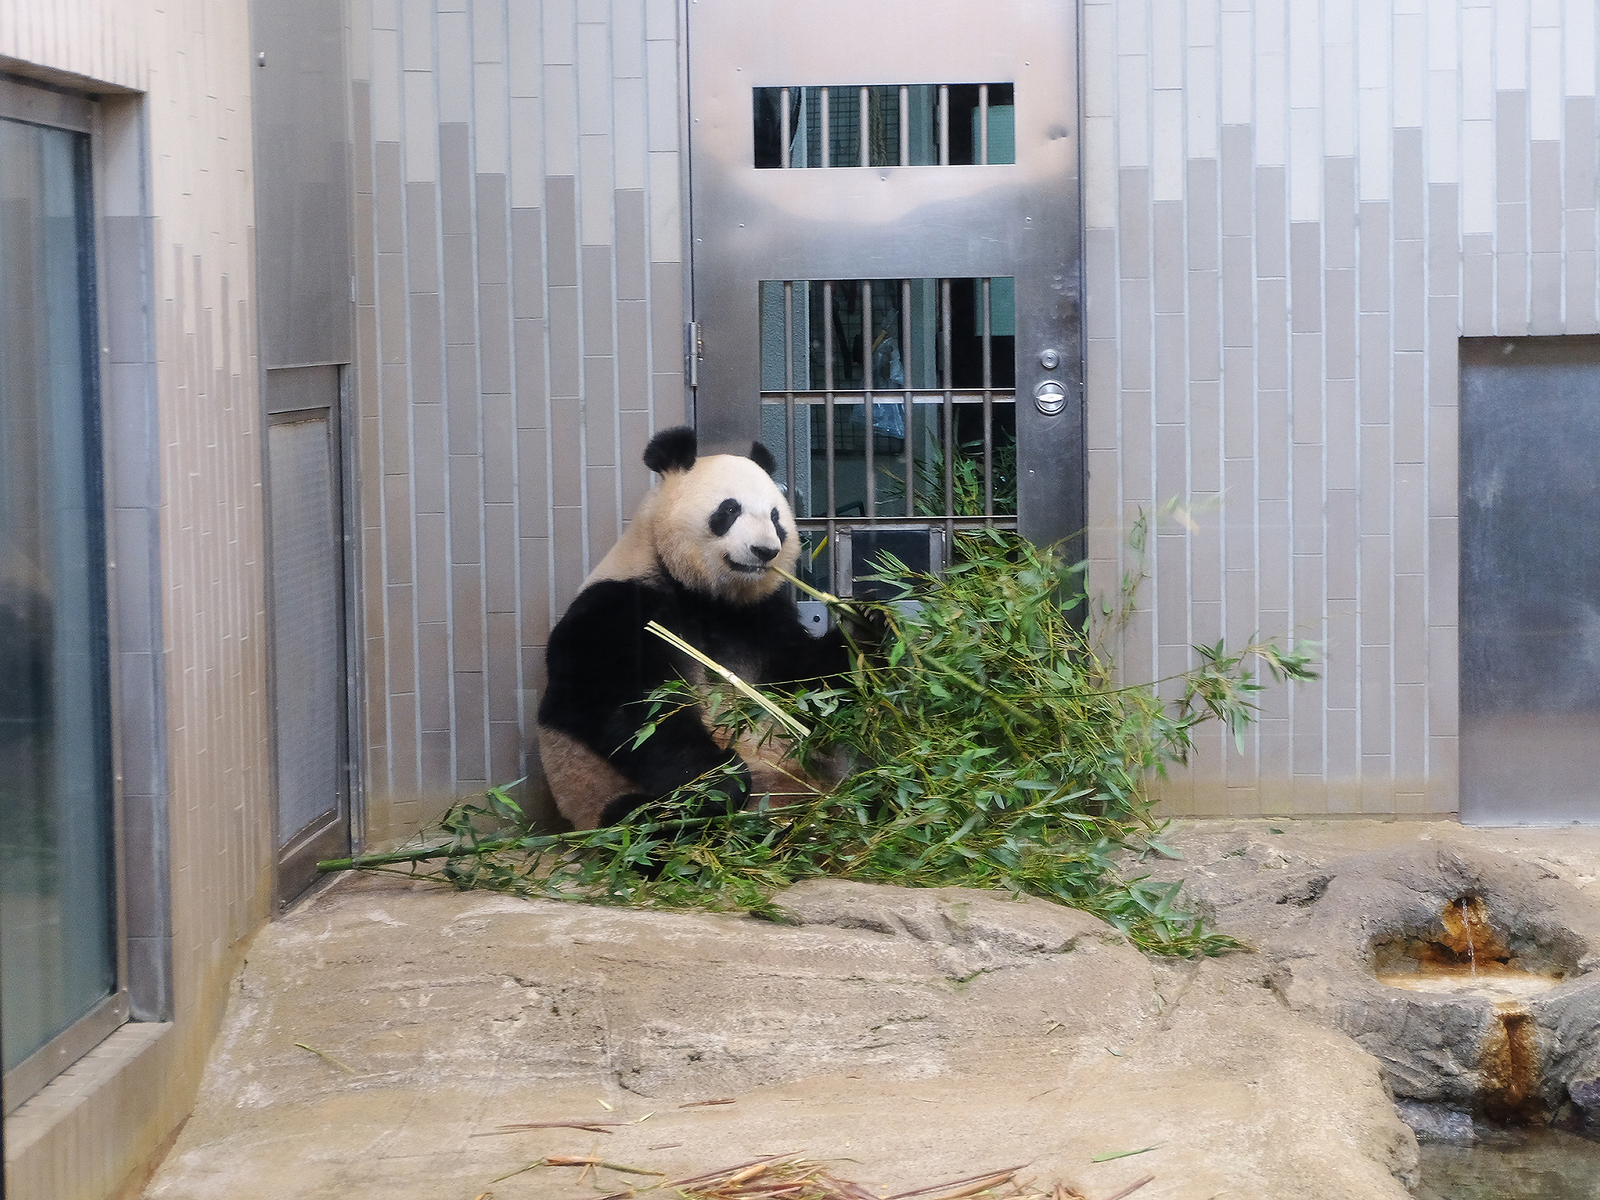 Giant panda at the Toronto zoo, one of the best in the world